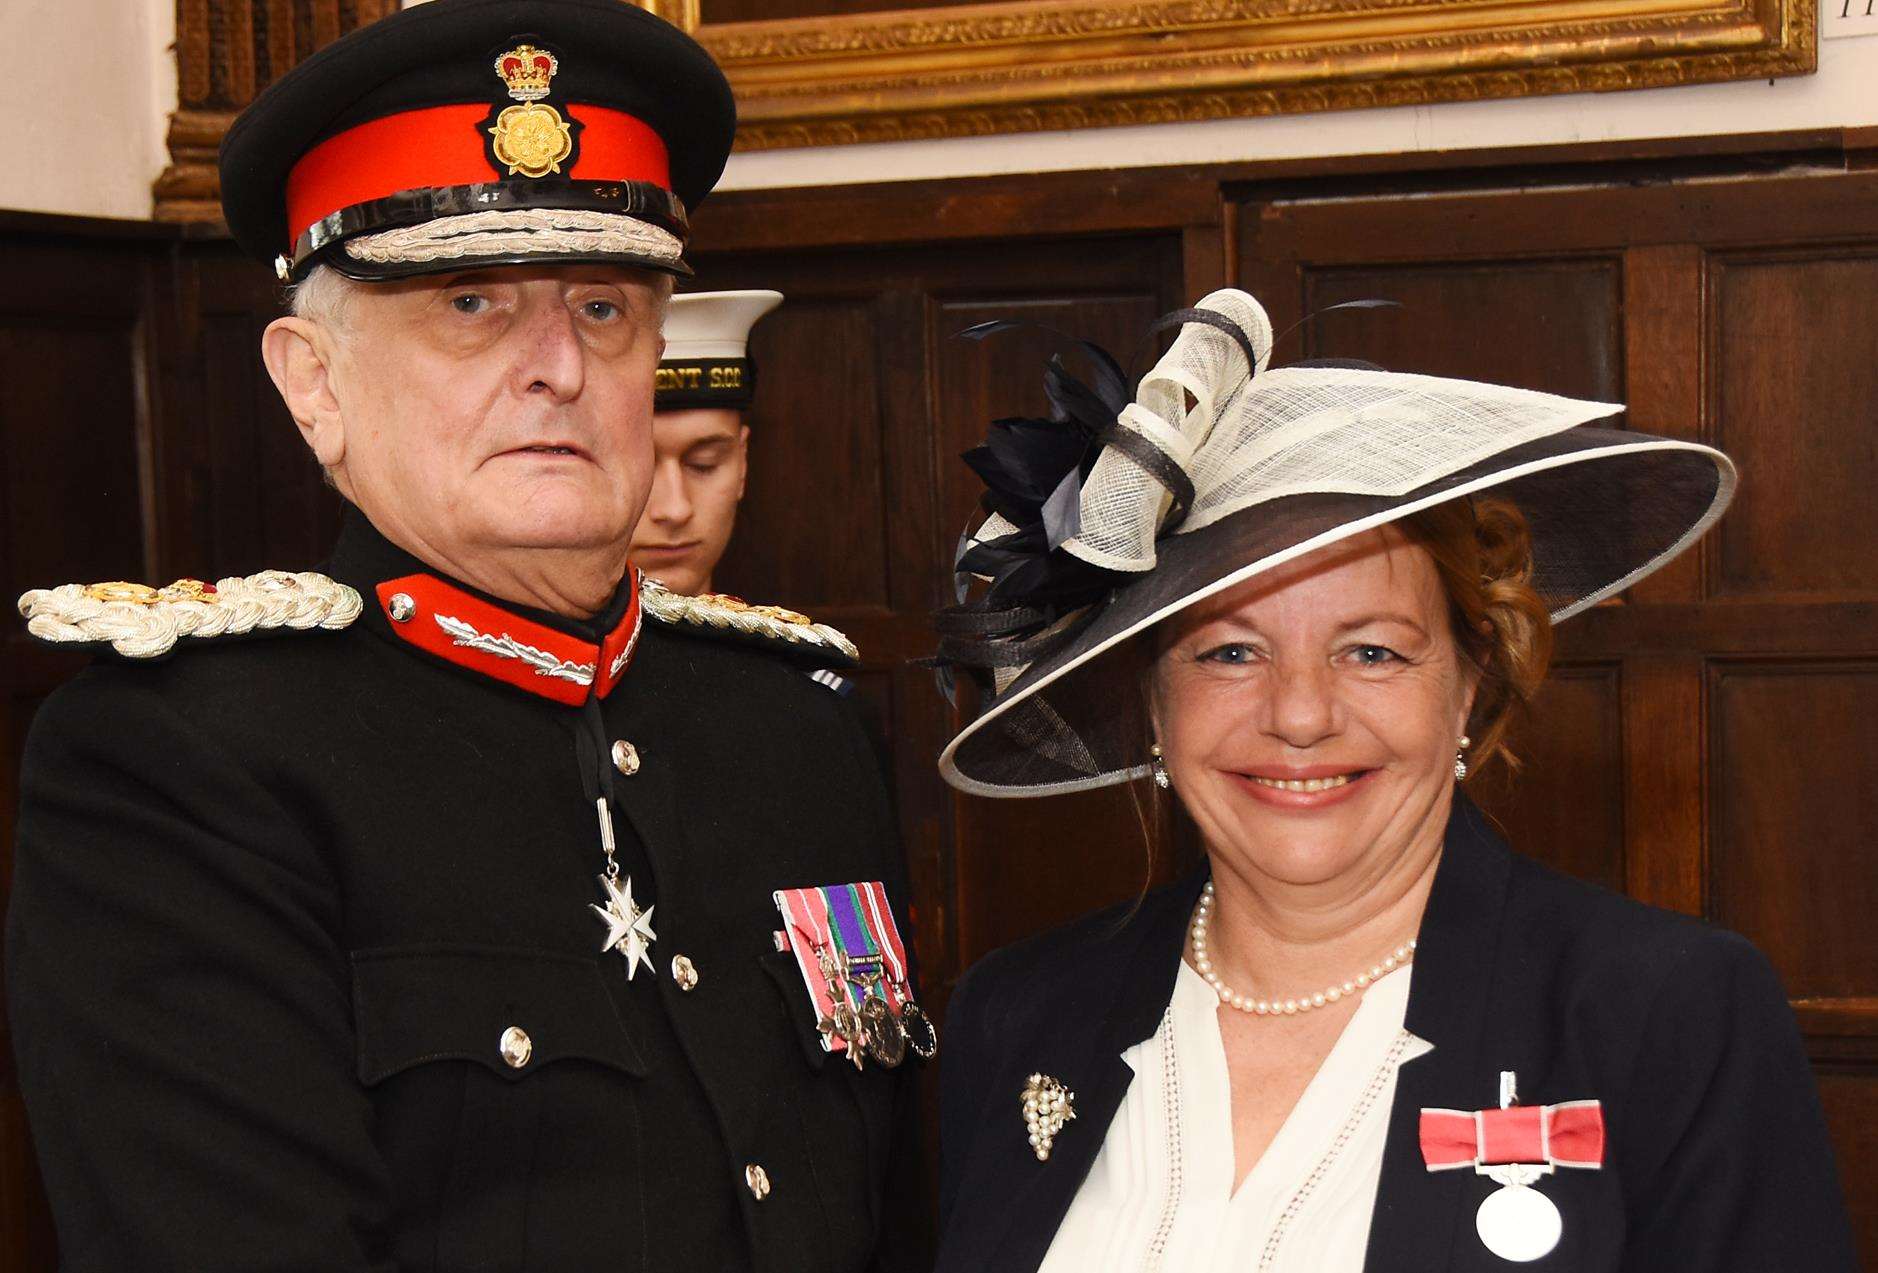 Anne Forbes was presented with the BEM by the Lord Lieutenant Viscount De L’Isle MBE